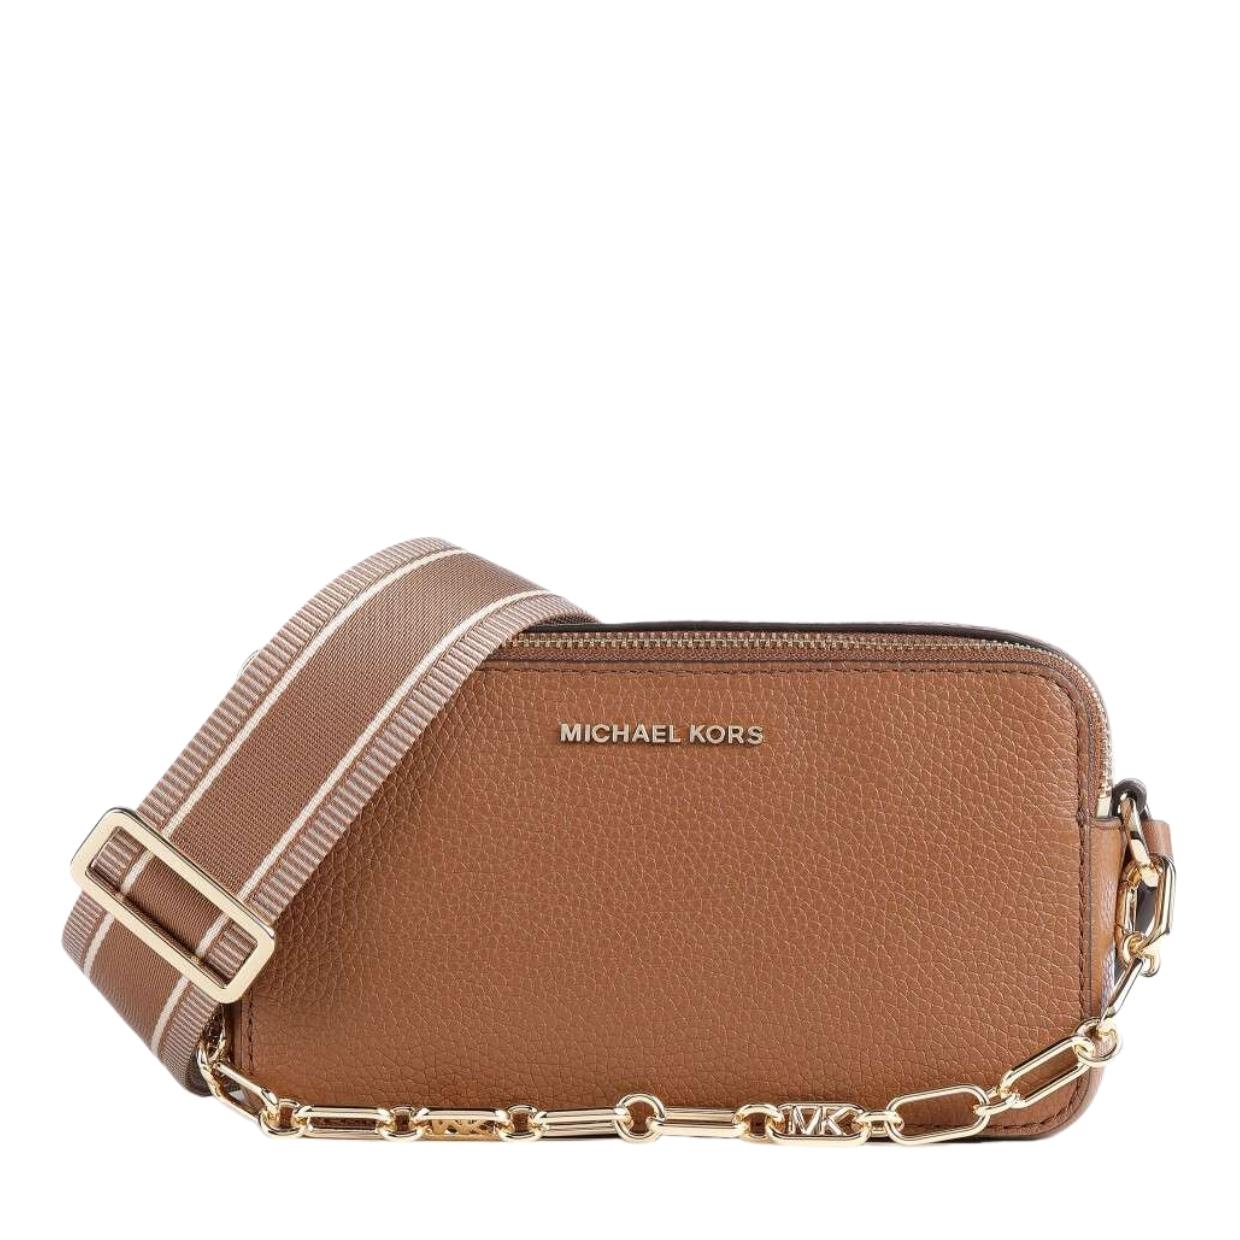 Jet set leather crossbody bag Michael Kors Brown in Leather - 16984604